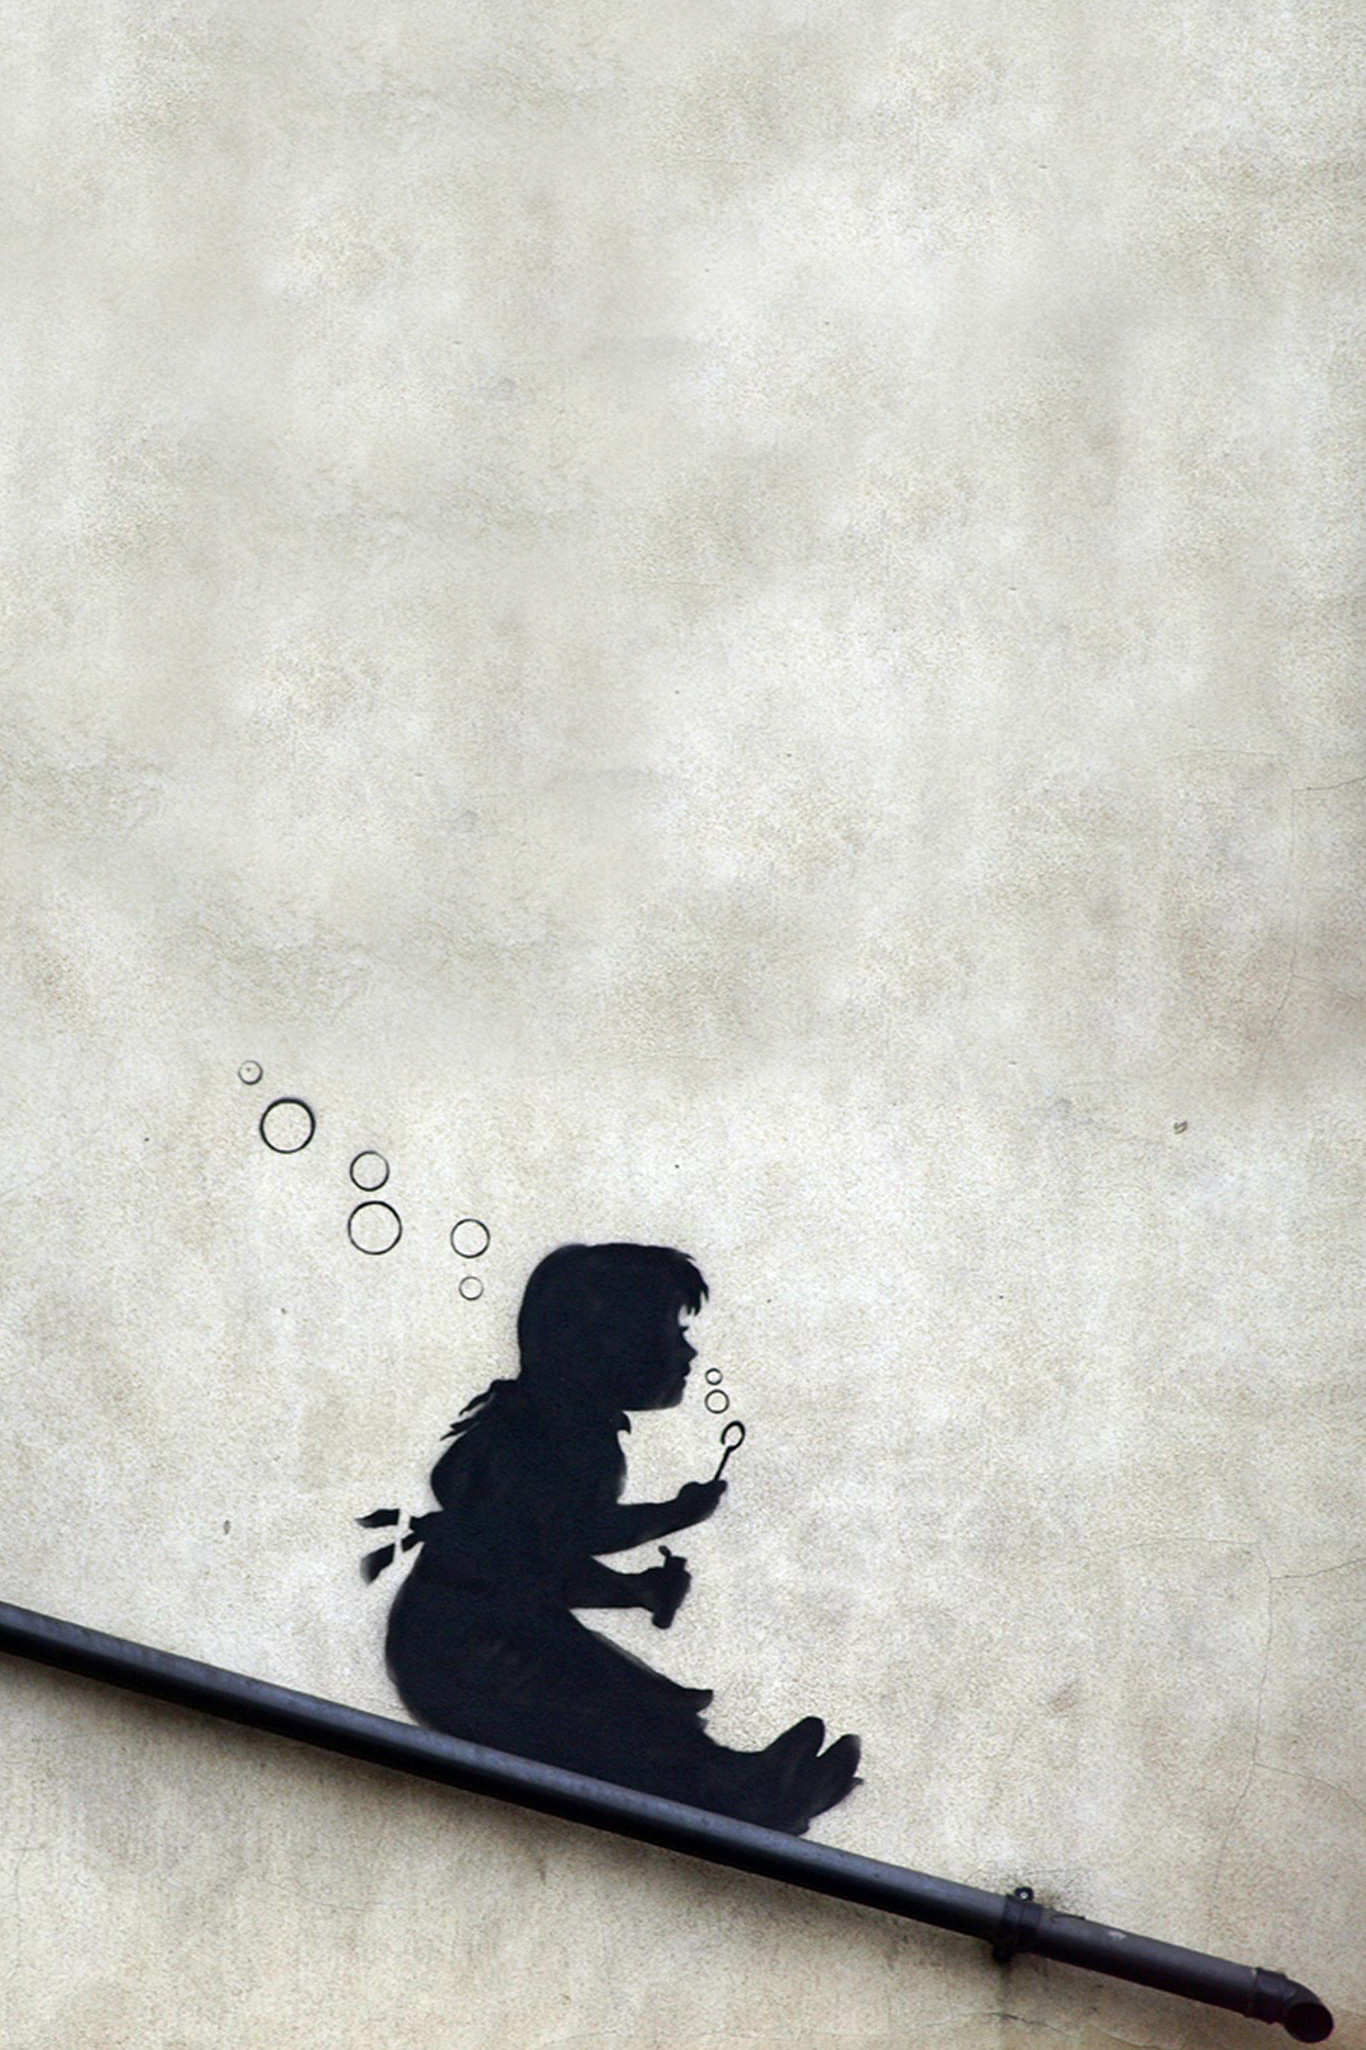 1366x2050 Banksy Girl Slide Bubbles Android Wallpaper. Download Your Screen Size  (1024 x 1024) - Recommended Download Original